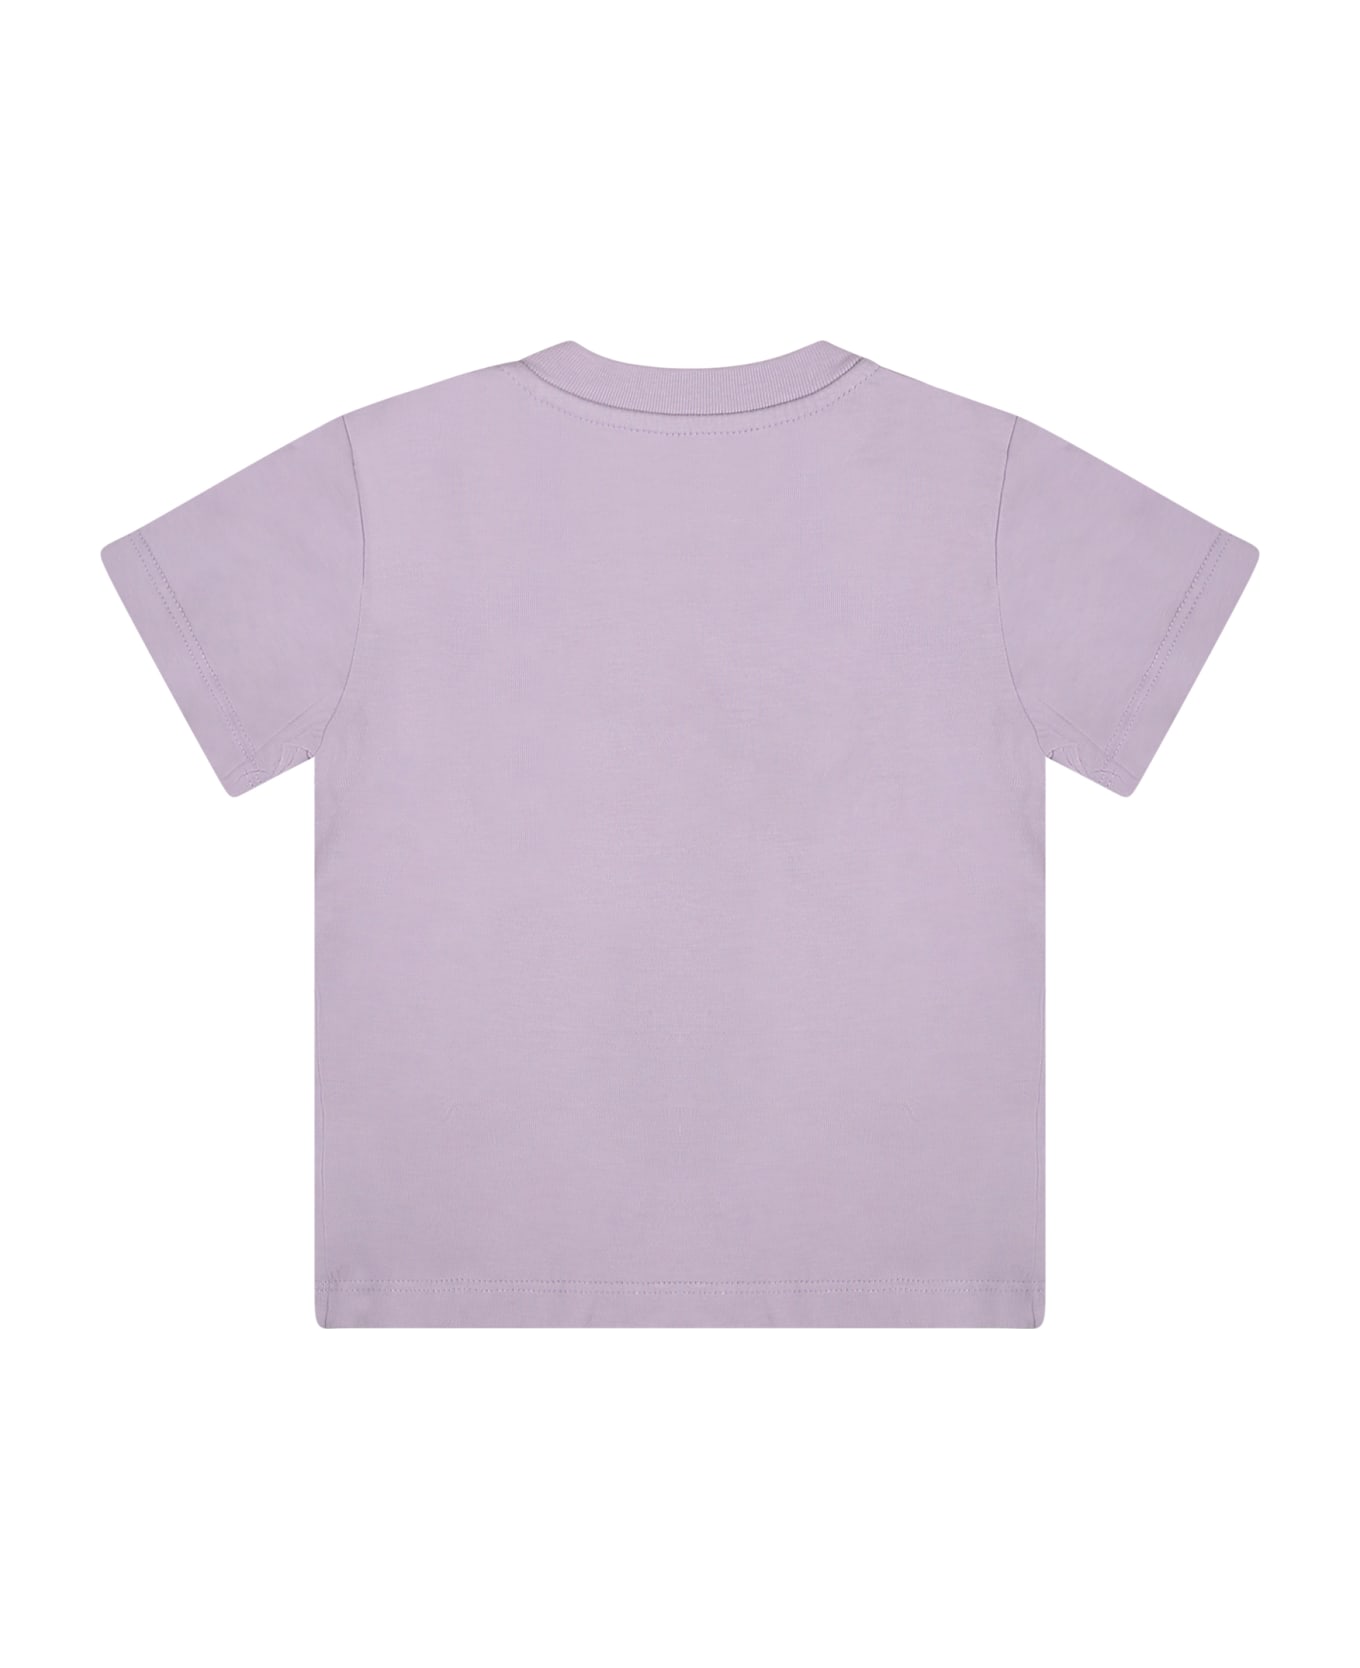 Palm Angels Purple T-shirt For Baby Girl With Bear - Violet Tシャツ＆ポロシャツ